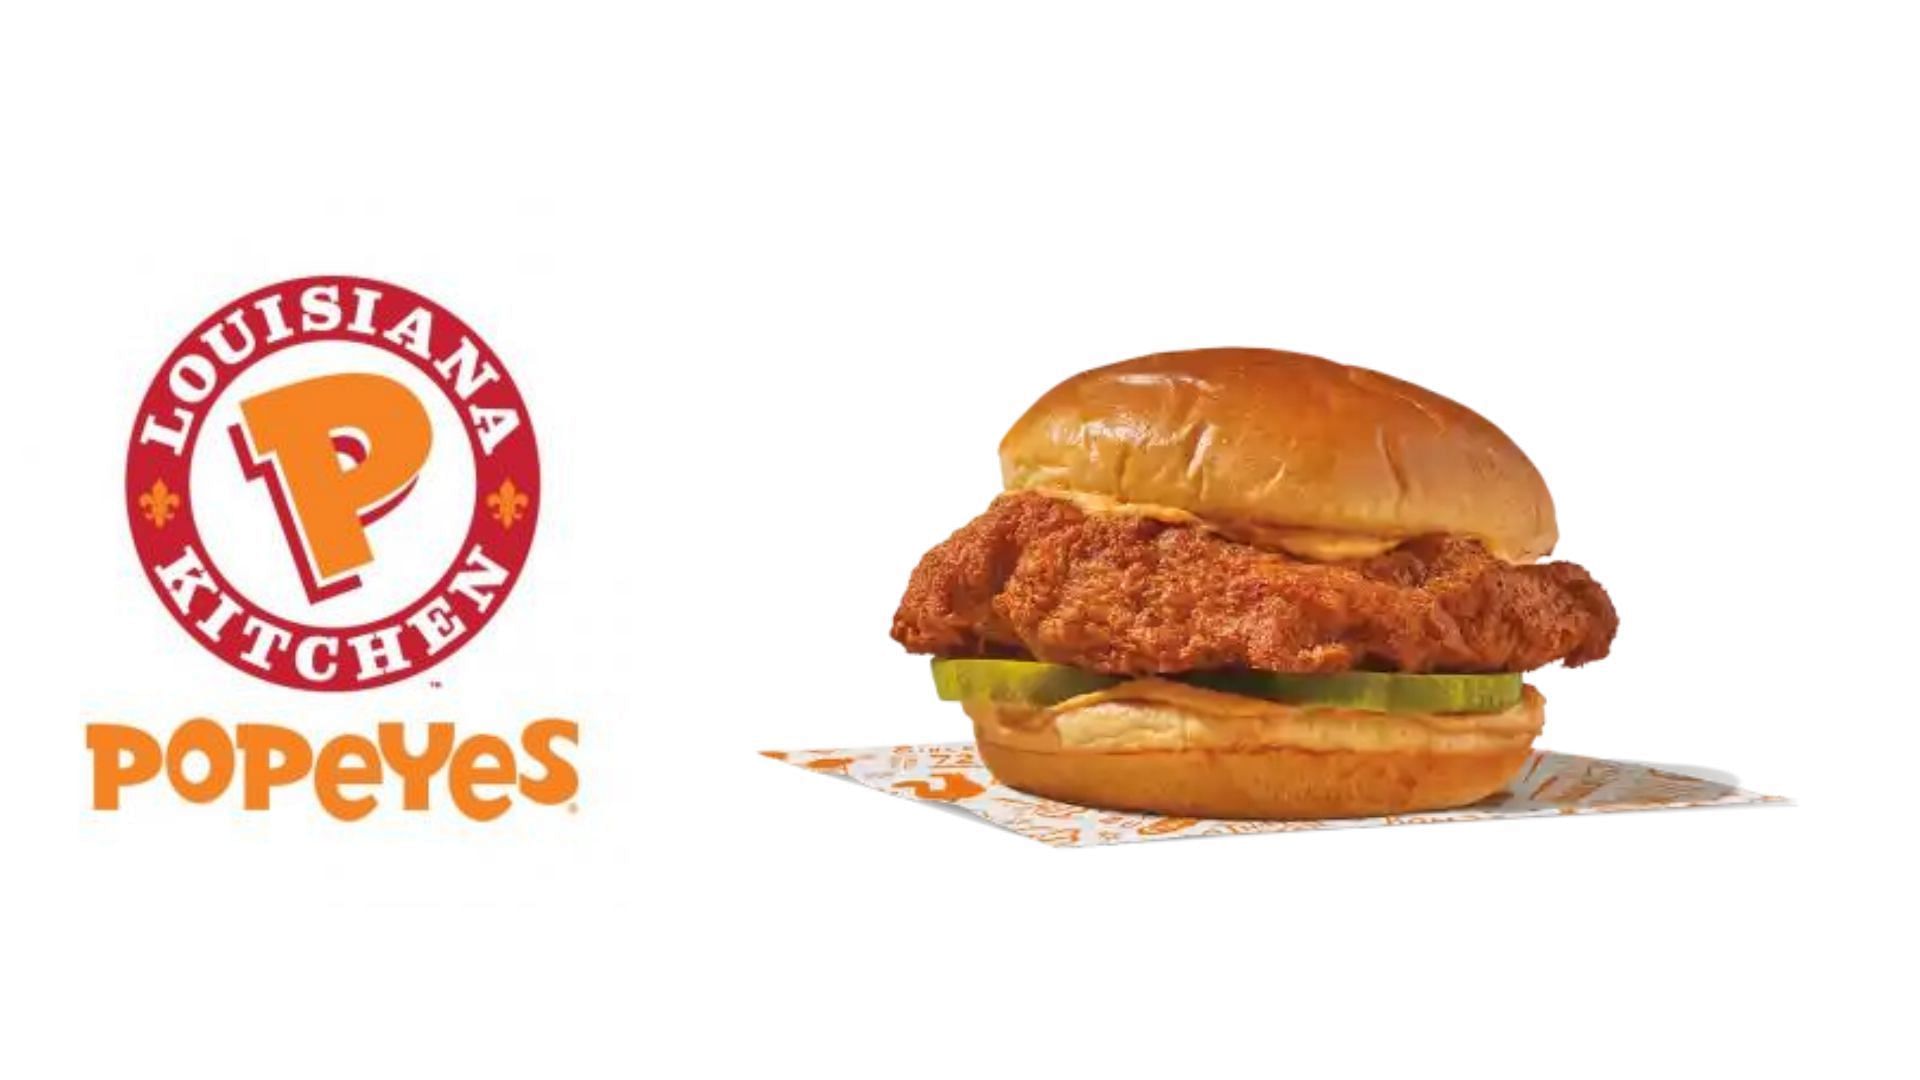 Spicy Blackened Chicken Sandwich (Promotional Image via Popeyes)